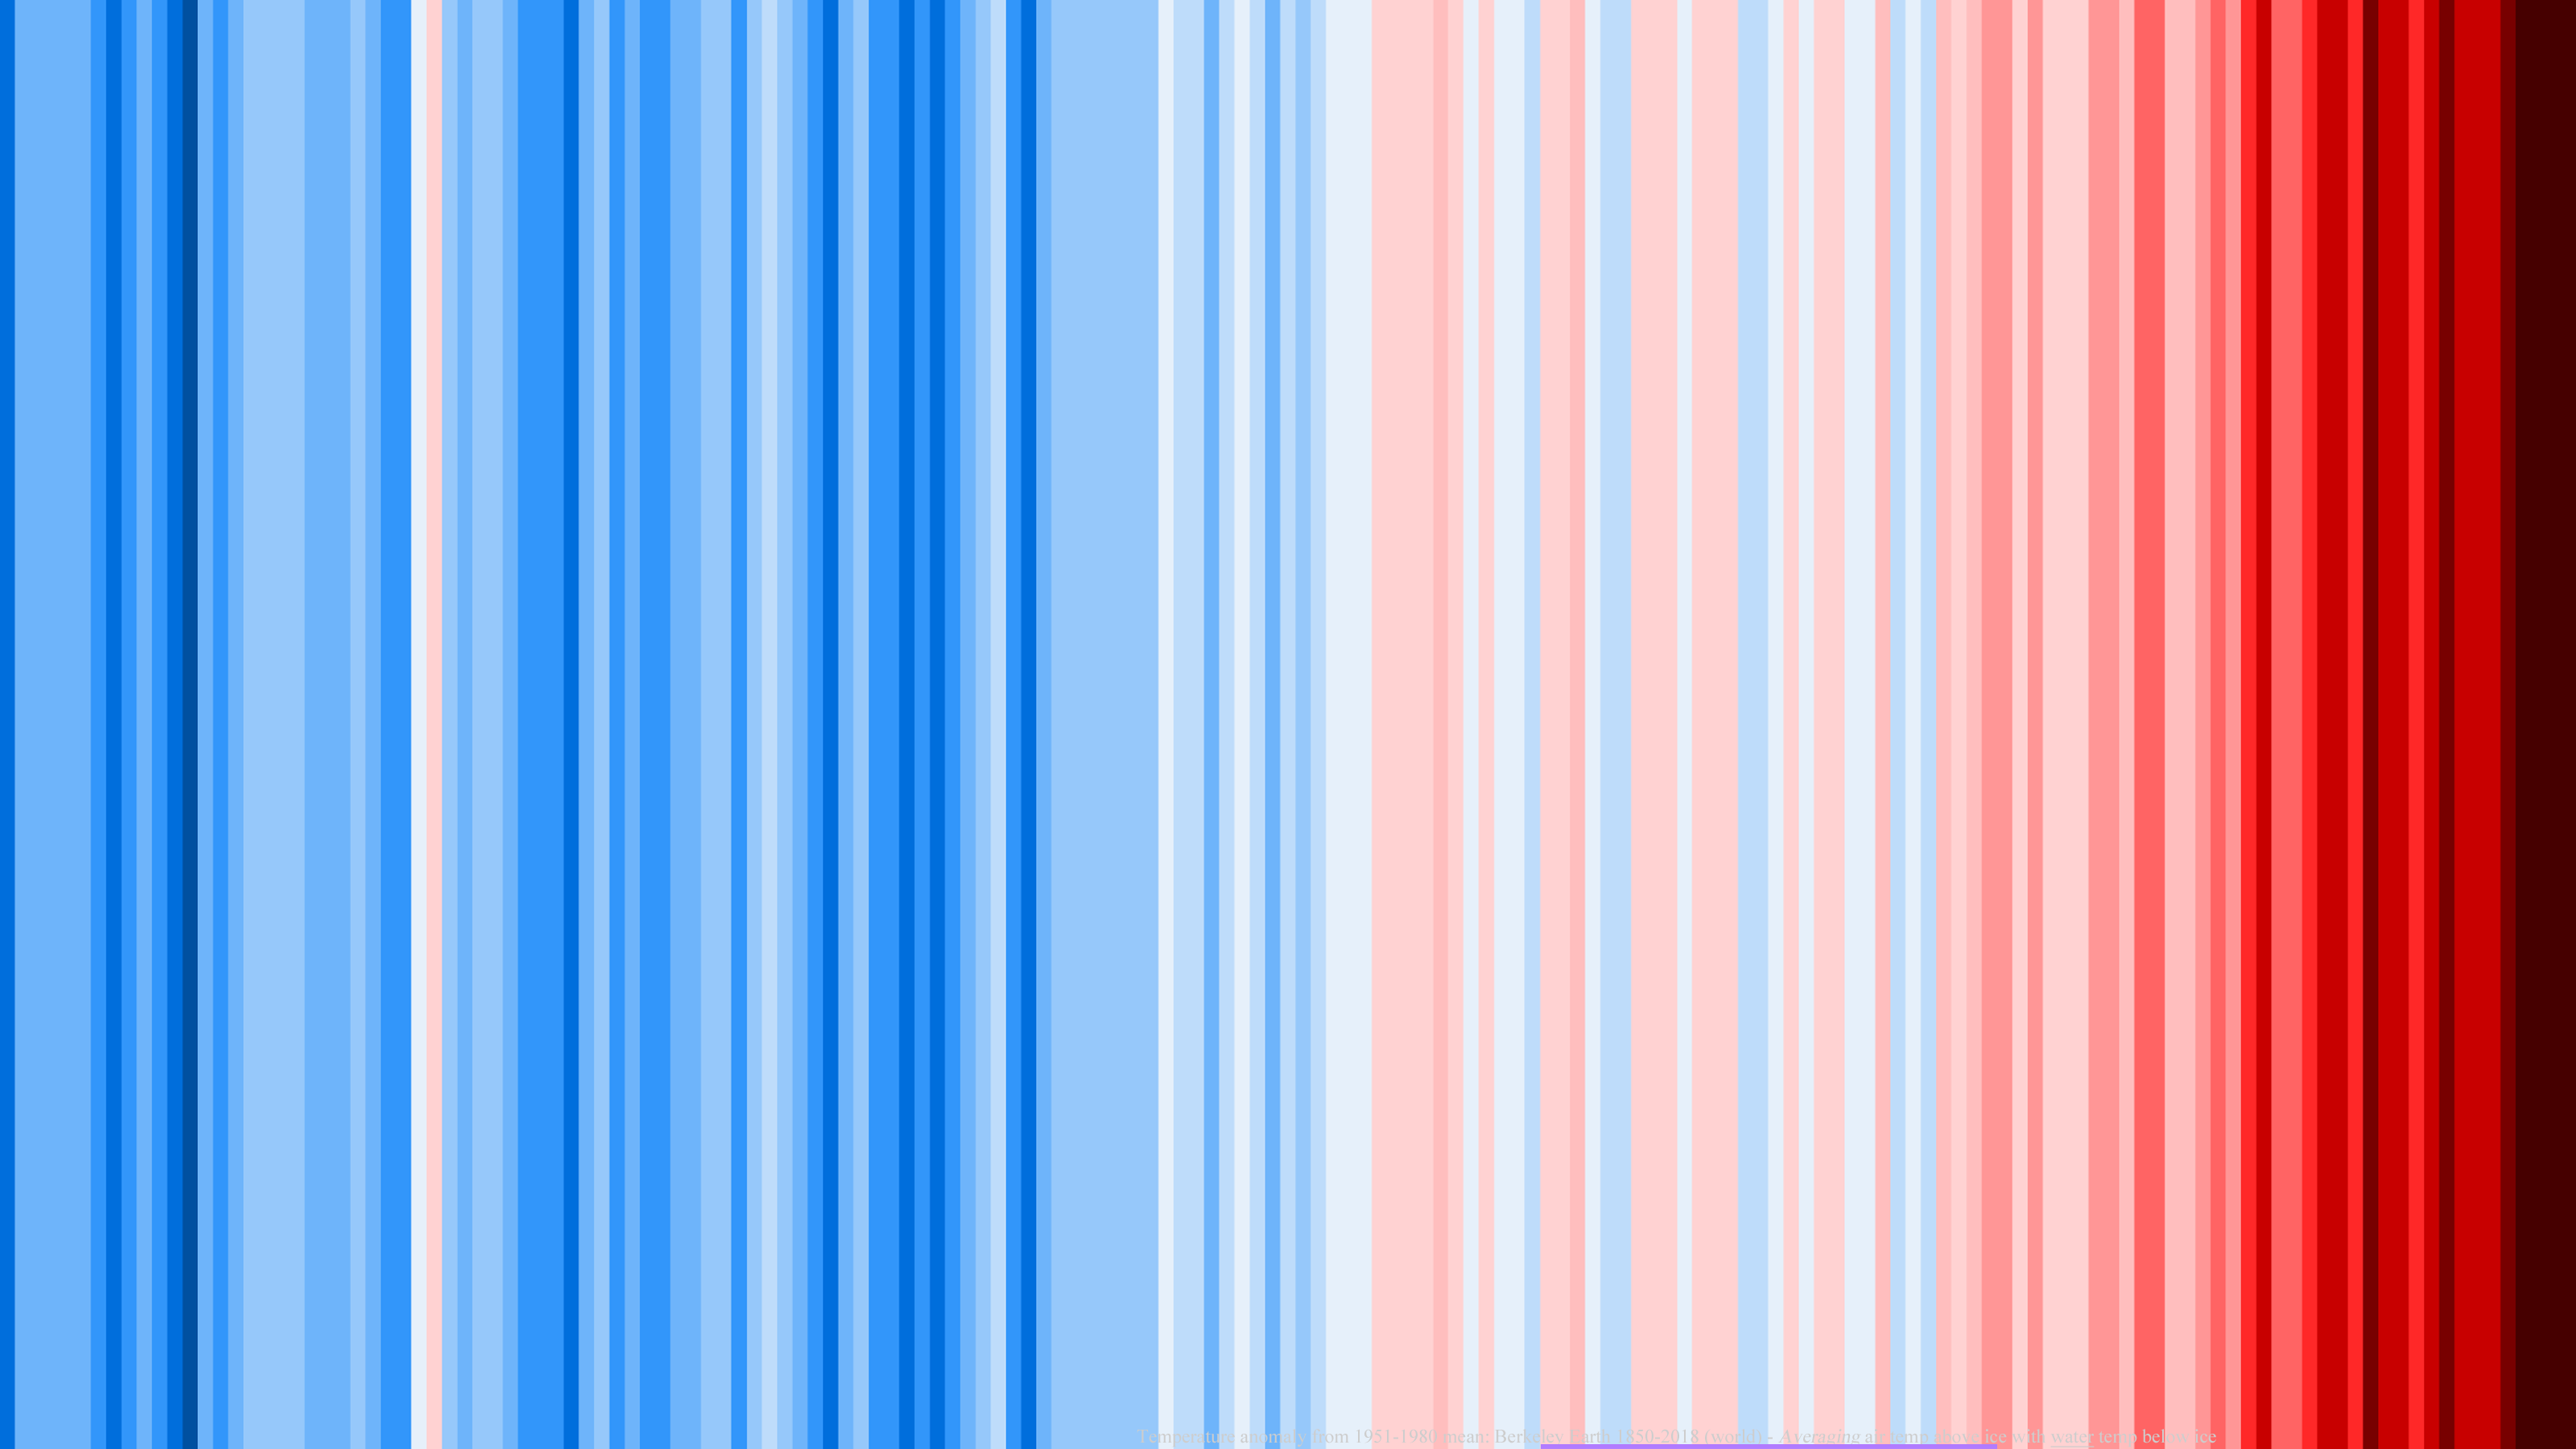 Blue and red stripes illustrating variations in temperature.